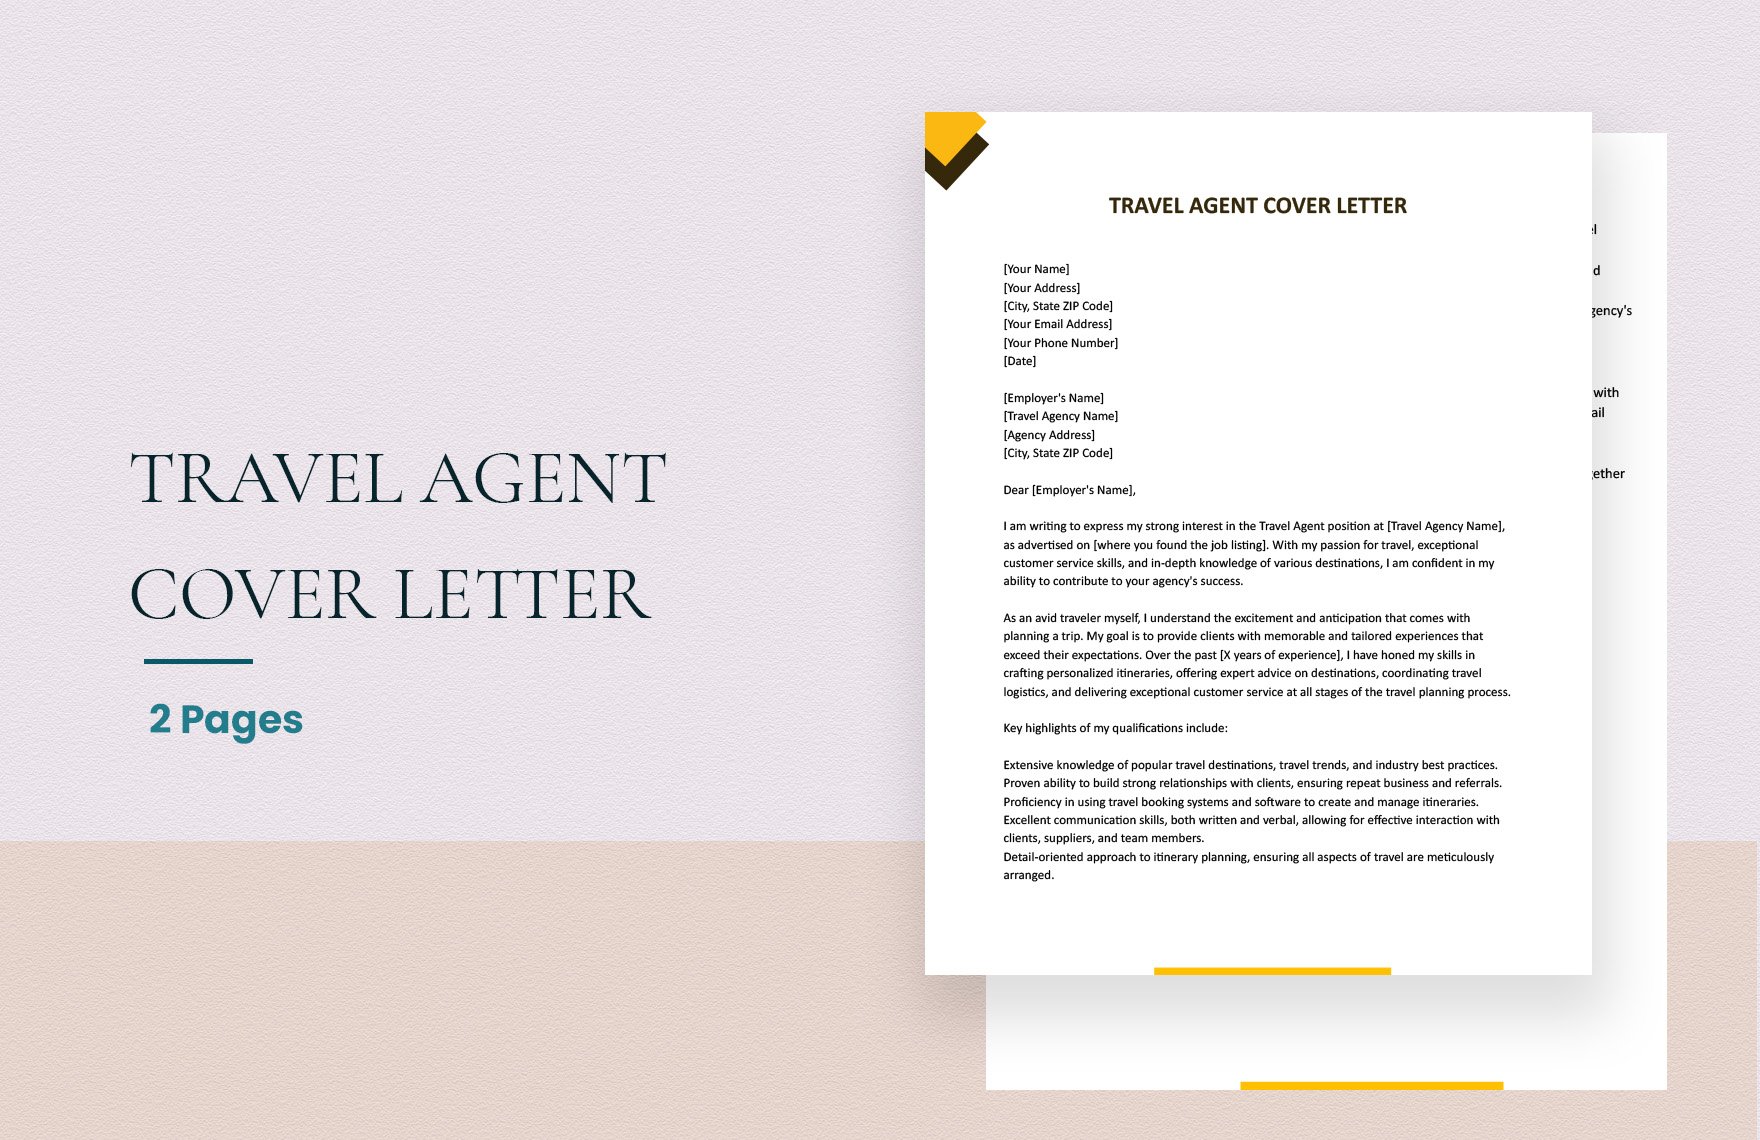 Travel Agent Cover Letter in Word, Google Docs, Apple Pages